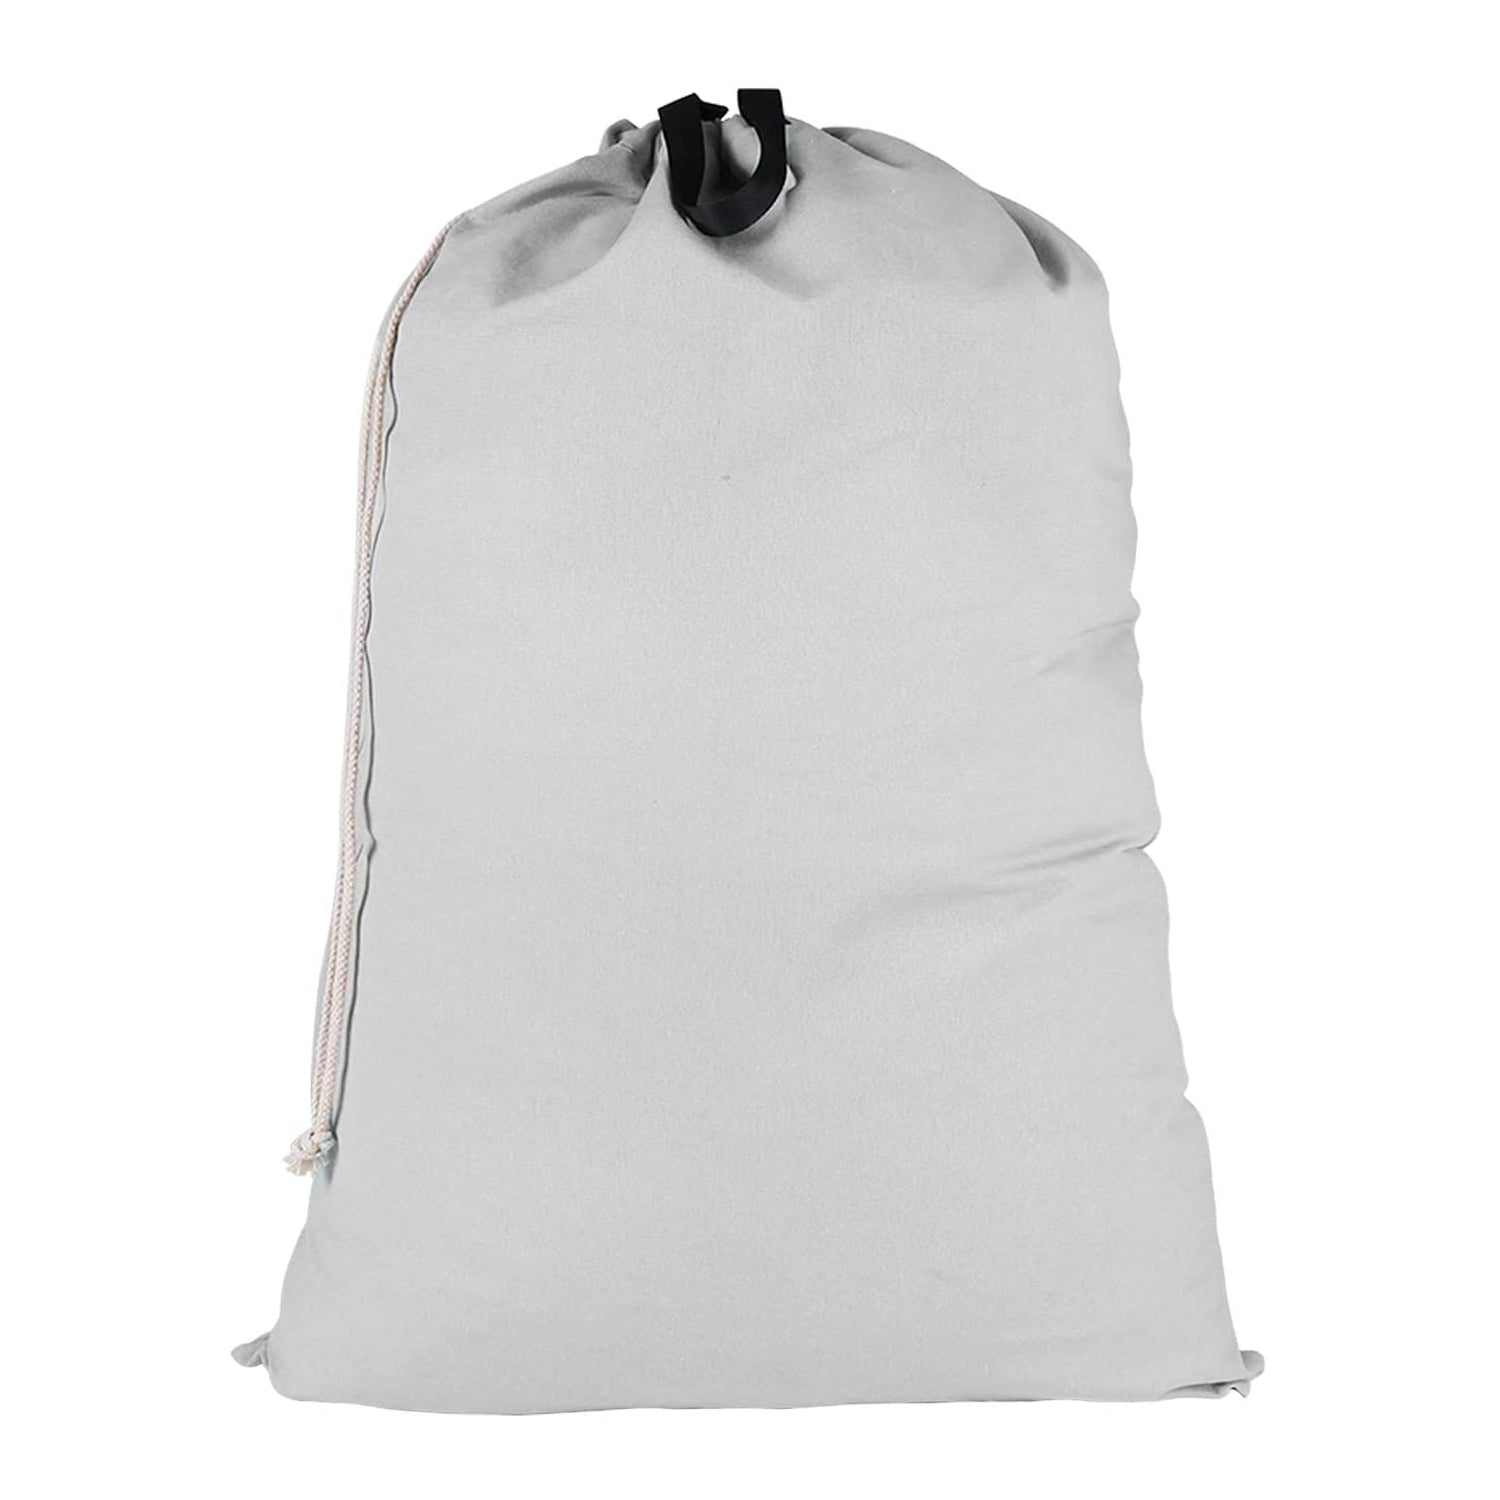 Laundry Bag Backpack Extra Large, Heavy Duty Laundry Bag with Straps and  Belt - CÔNG TY TNHH DỊCH VỤ BẢO VỆ THĂNG LONG SECOM